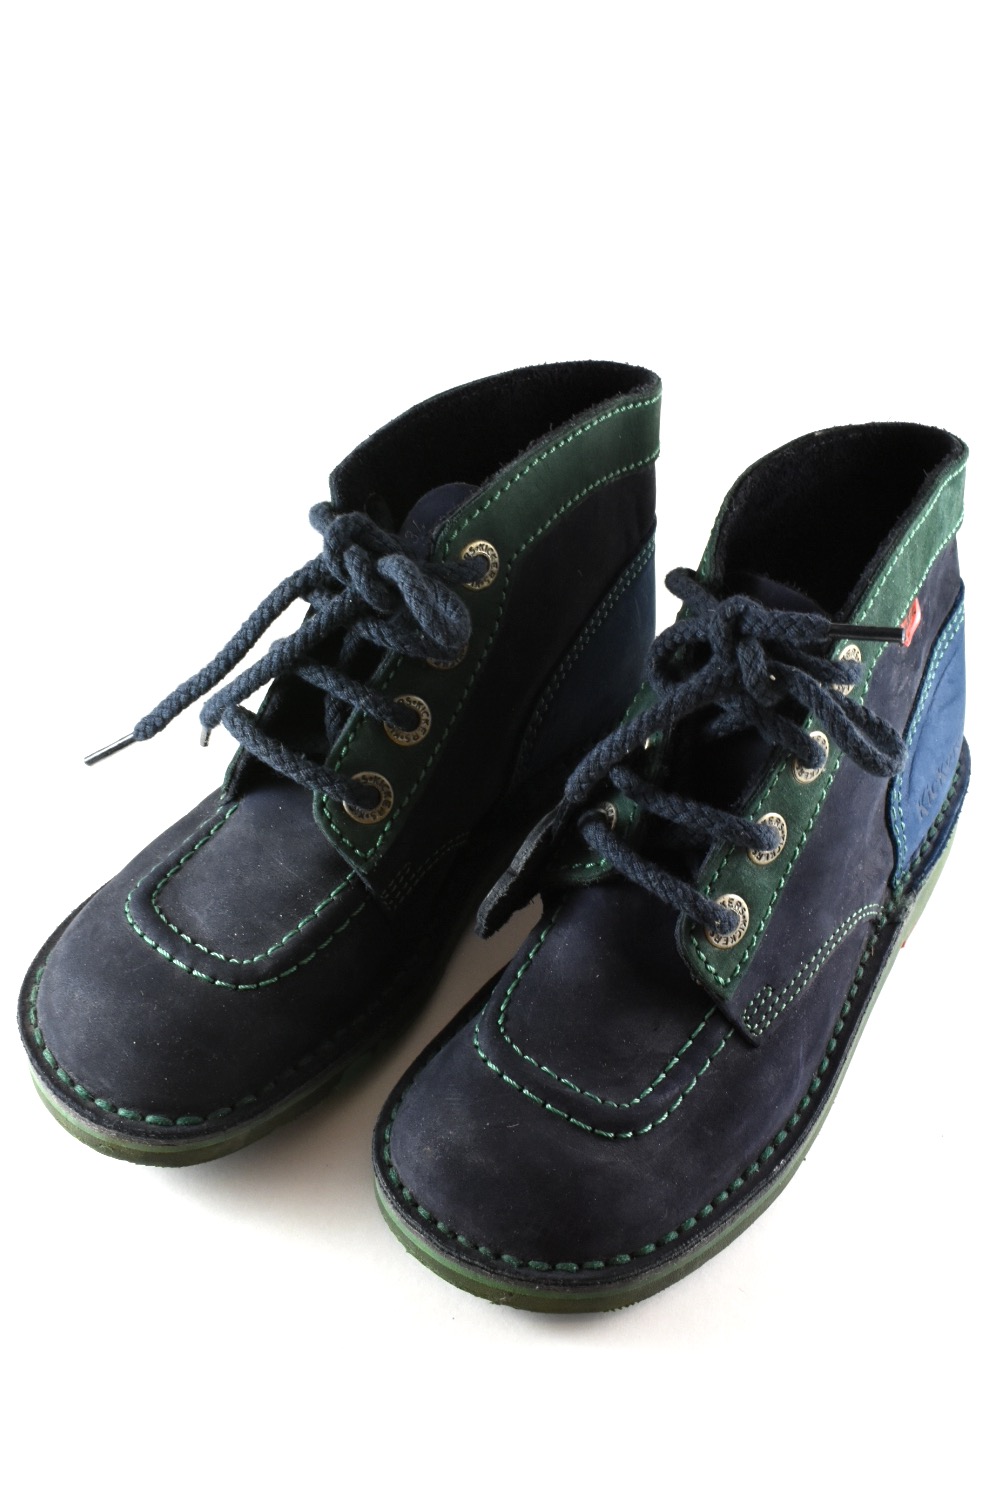 Kickers Navy Kickers For Sale 